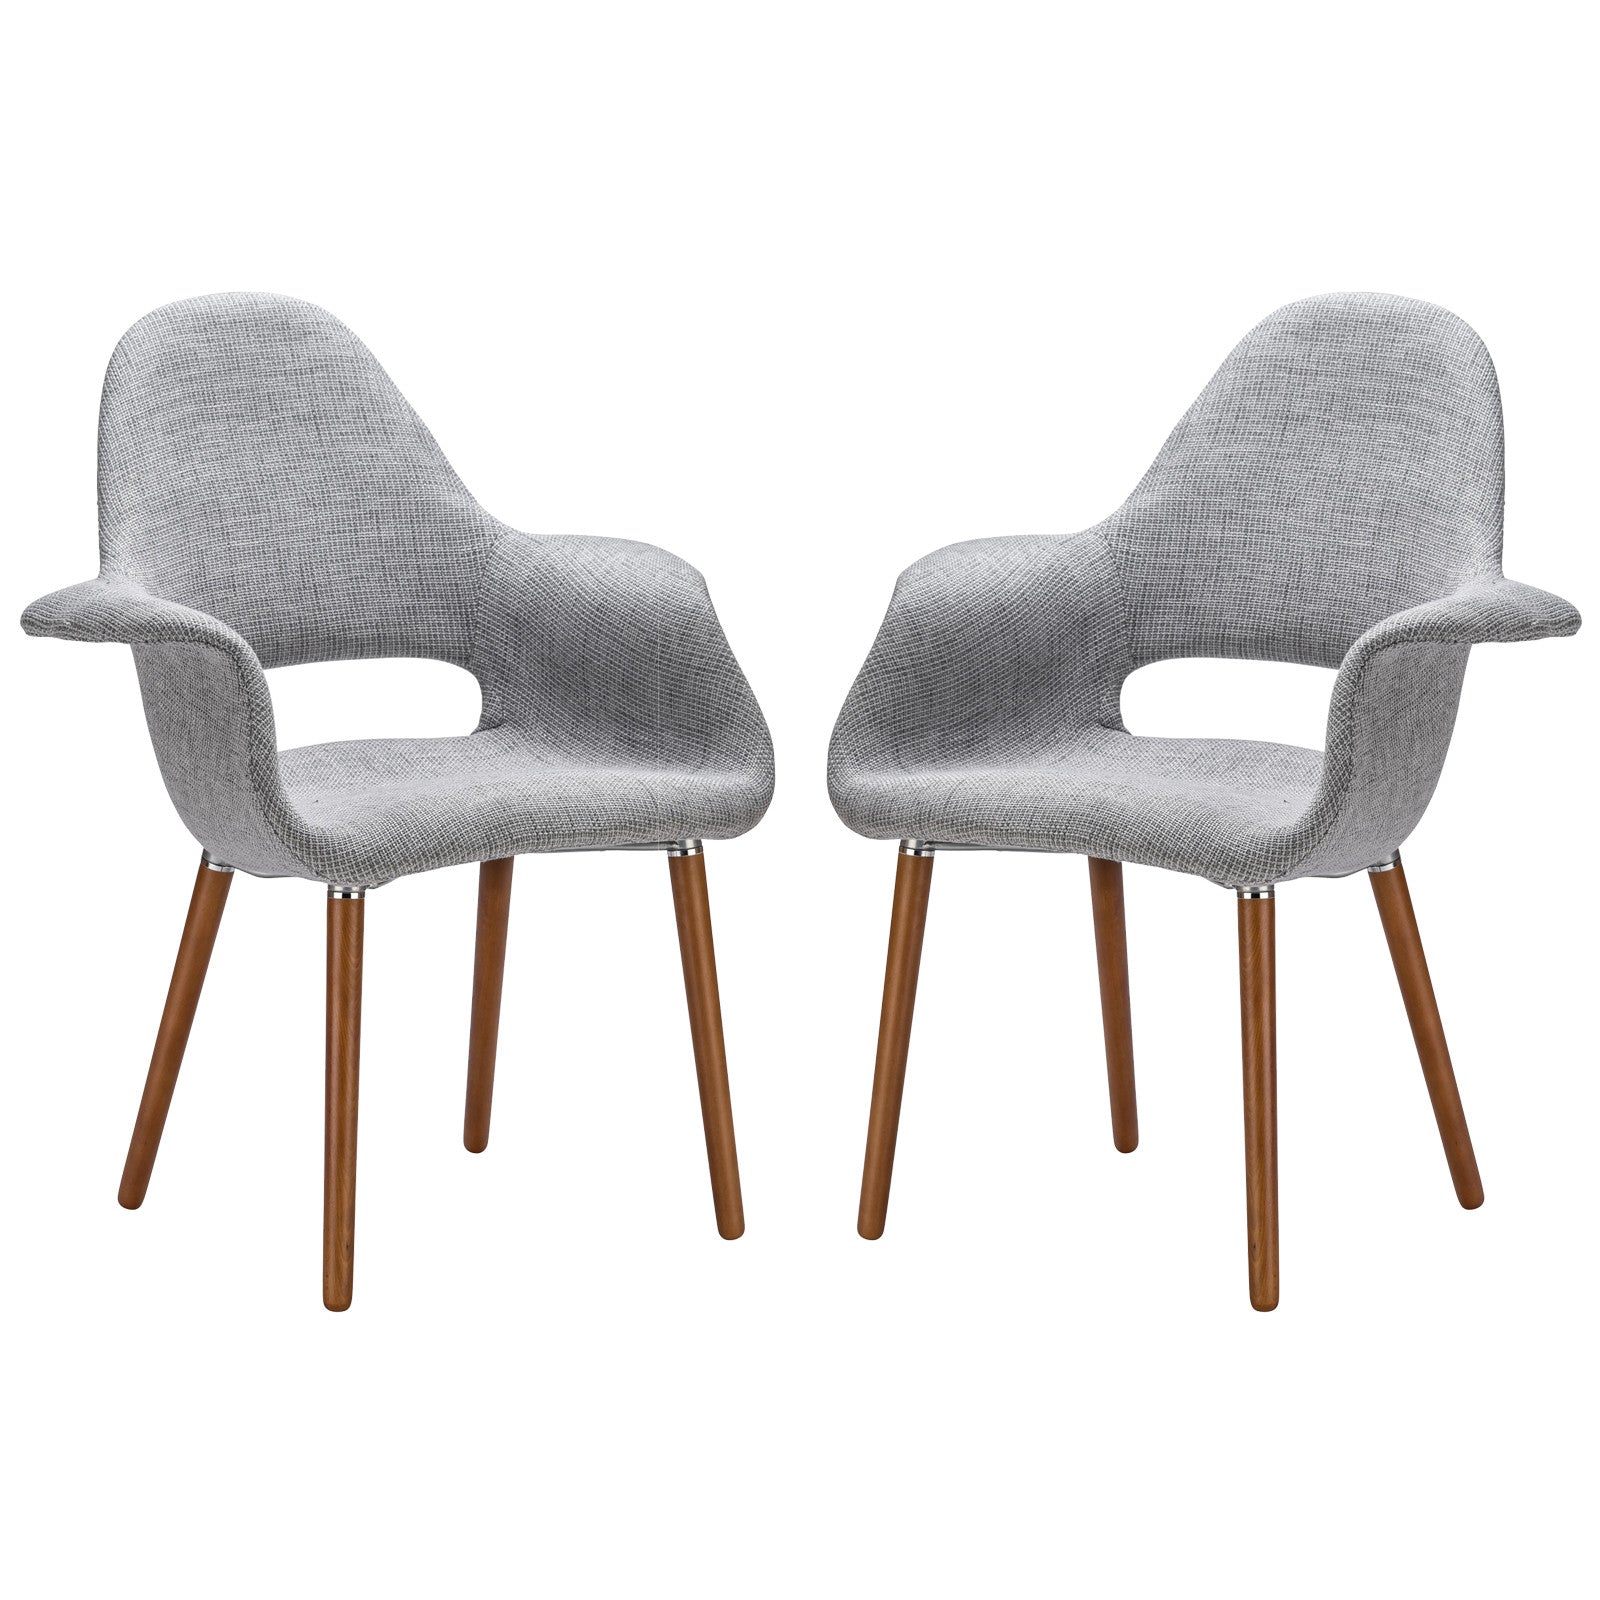 EdgeMod Barclay Dining Chair - Set Of 2